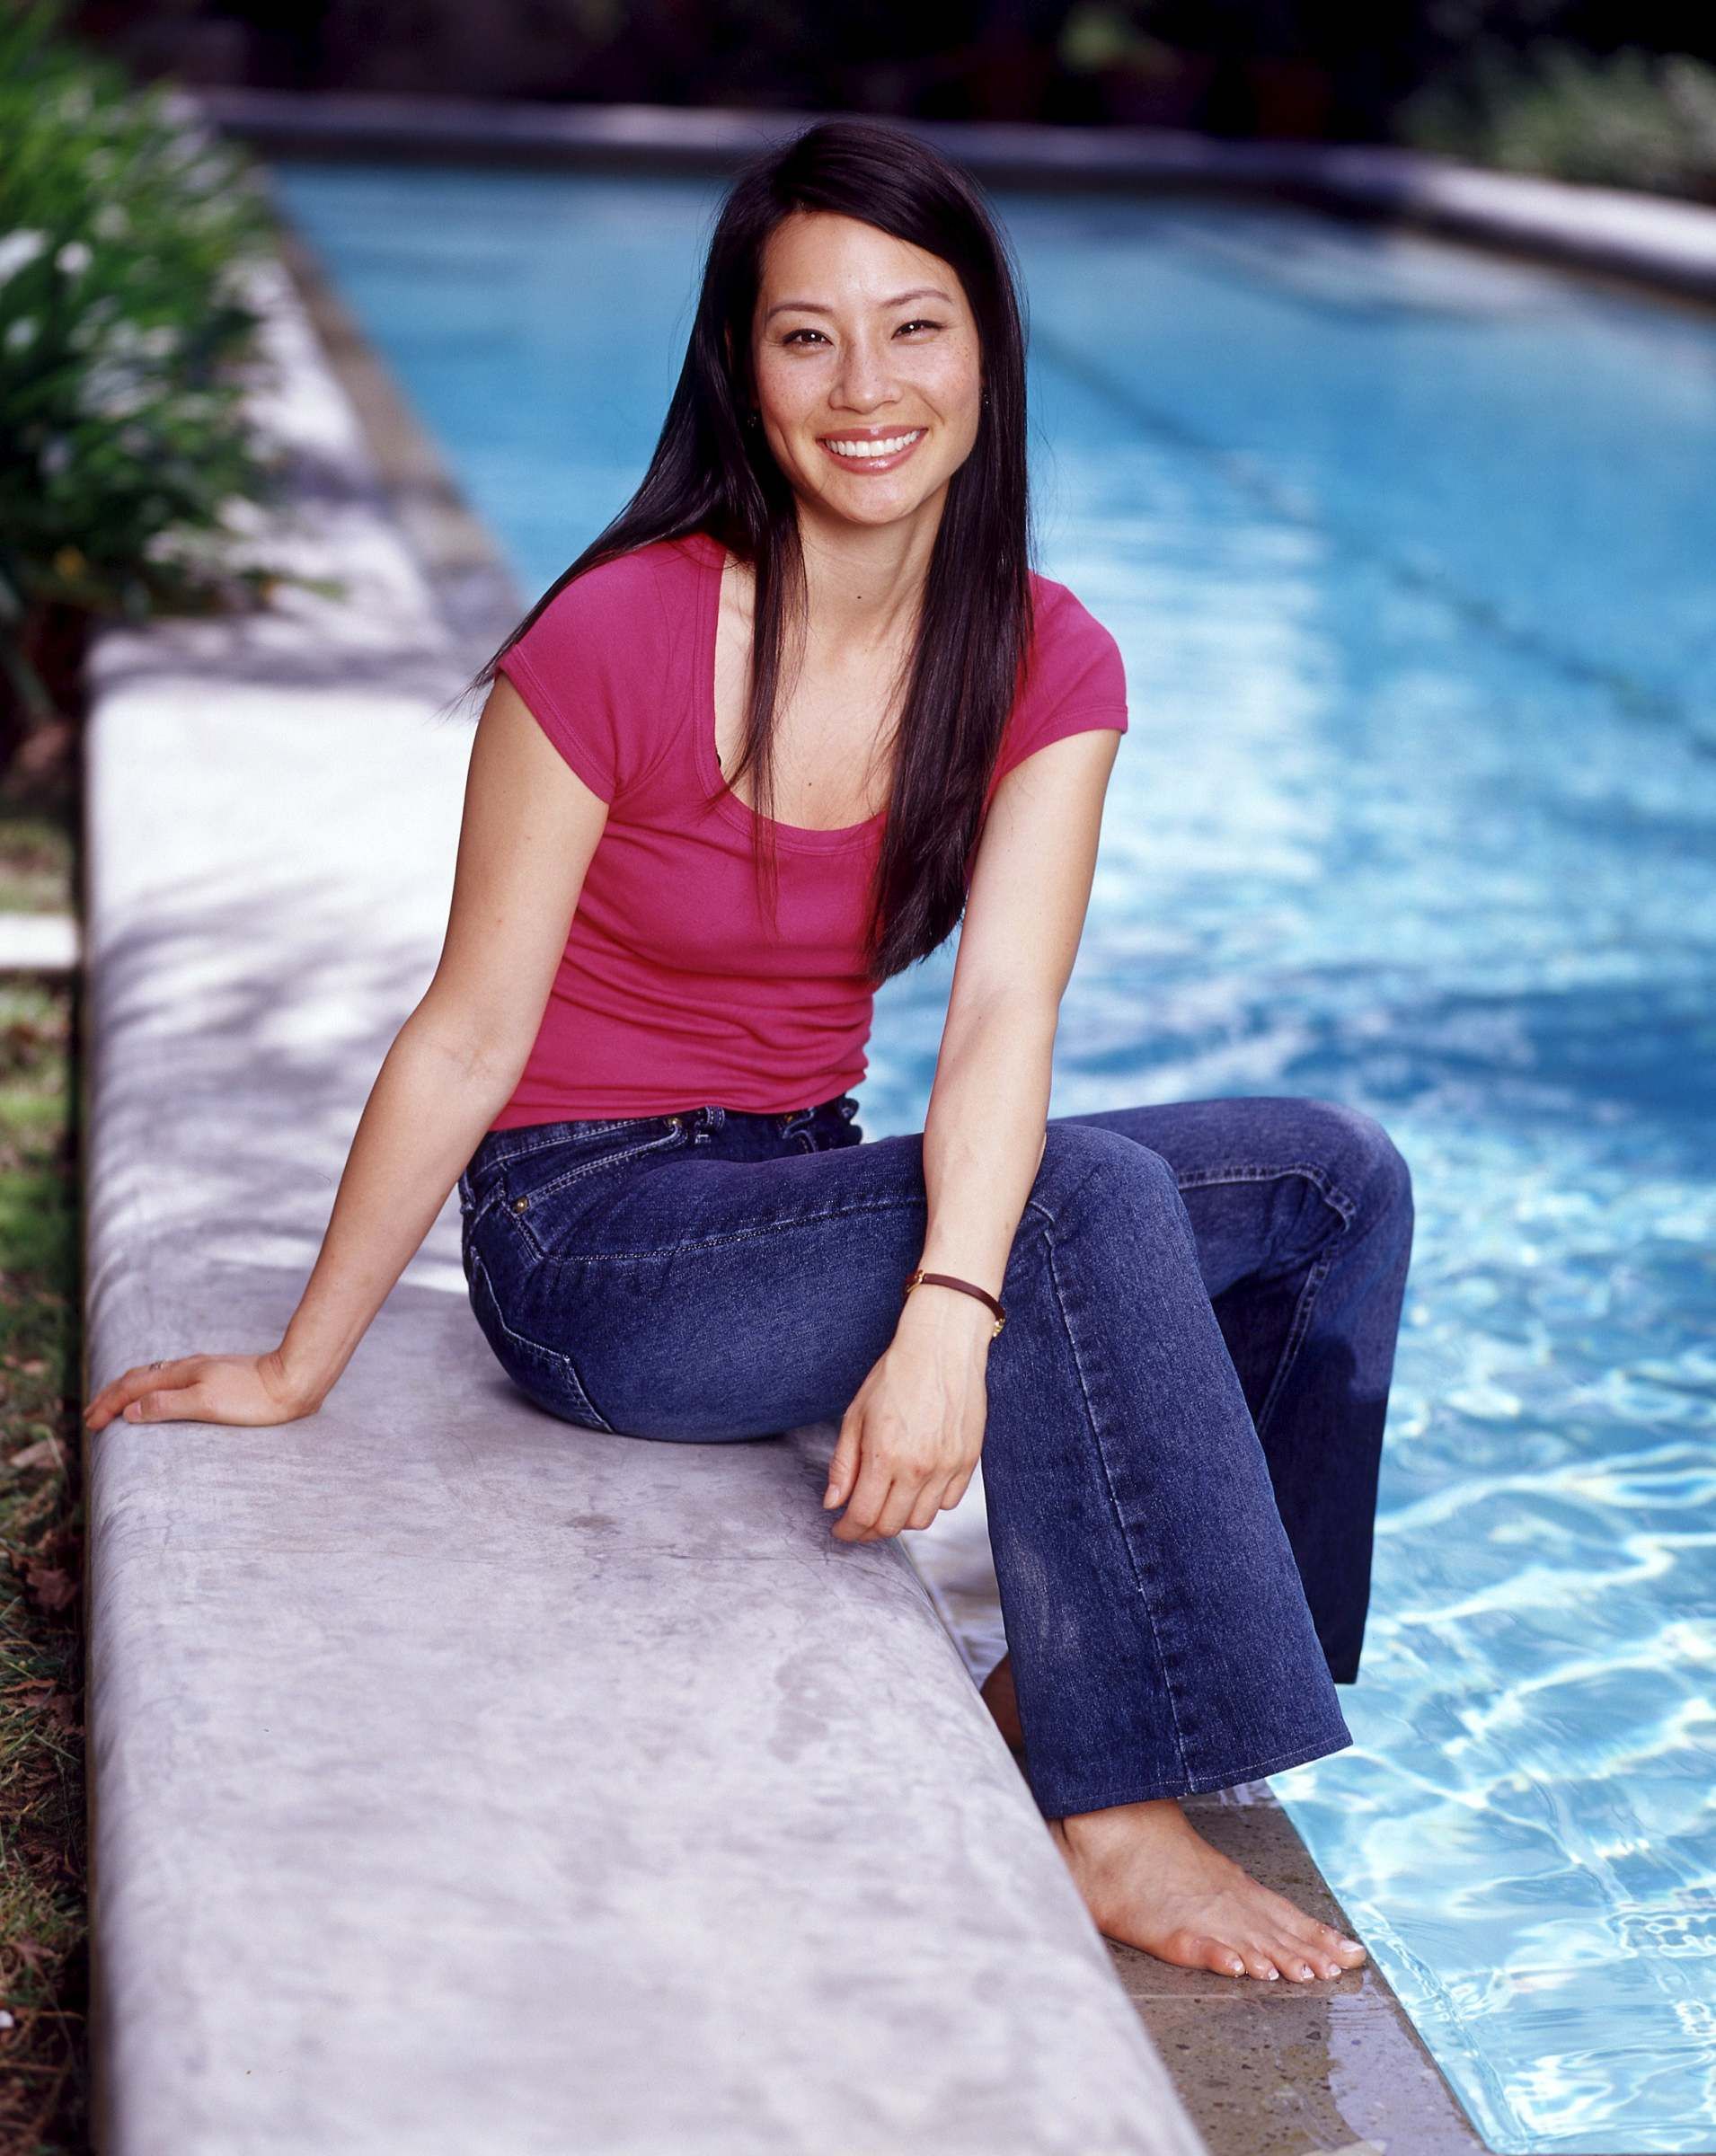 debi potter recommends lucy liu barefoot pic